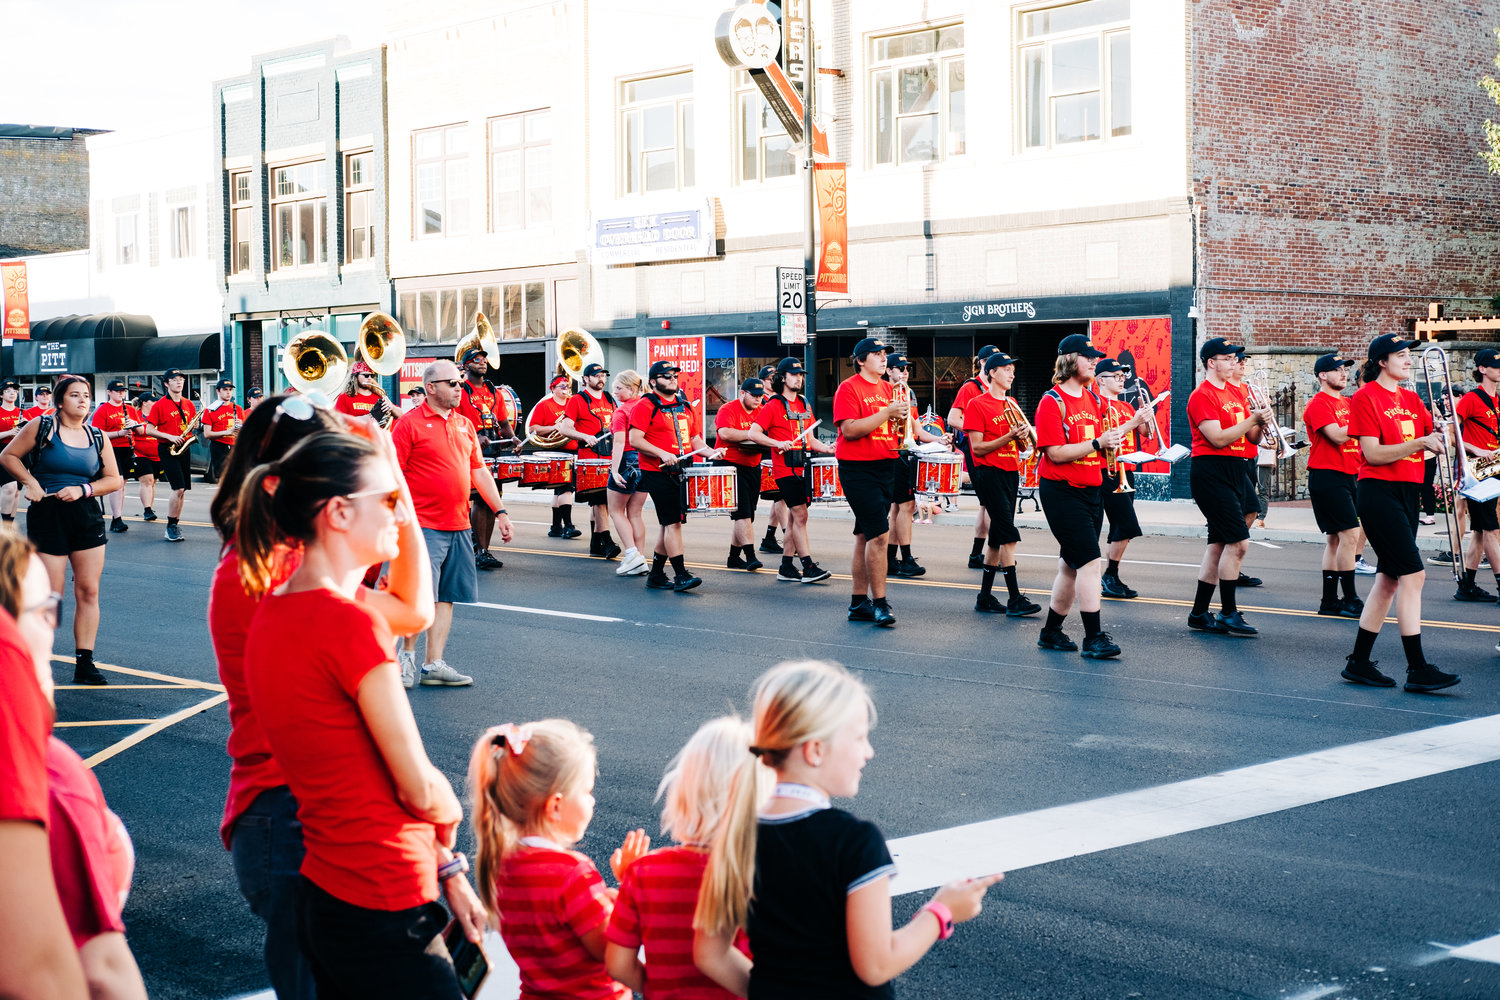 The Pride of the Plains Marching Band marches down Broadway as community members watch during the Paint the Town Red Block Party on Wednesday, Aug. 31.